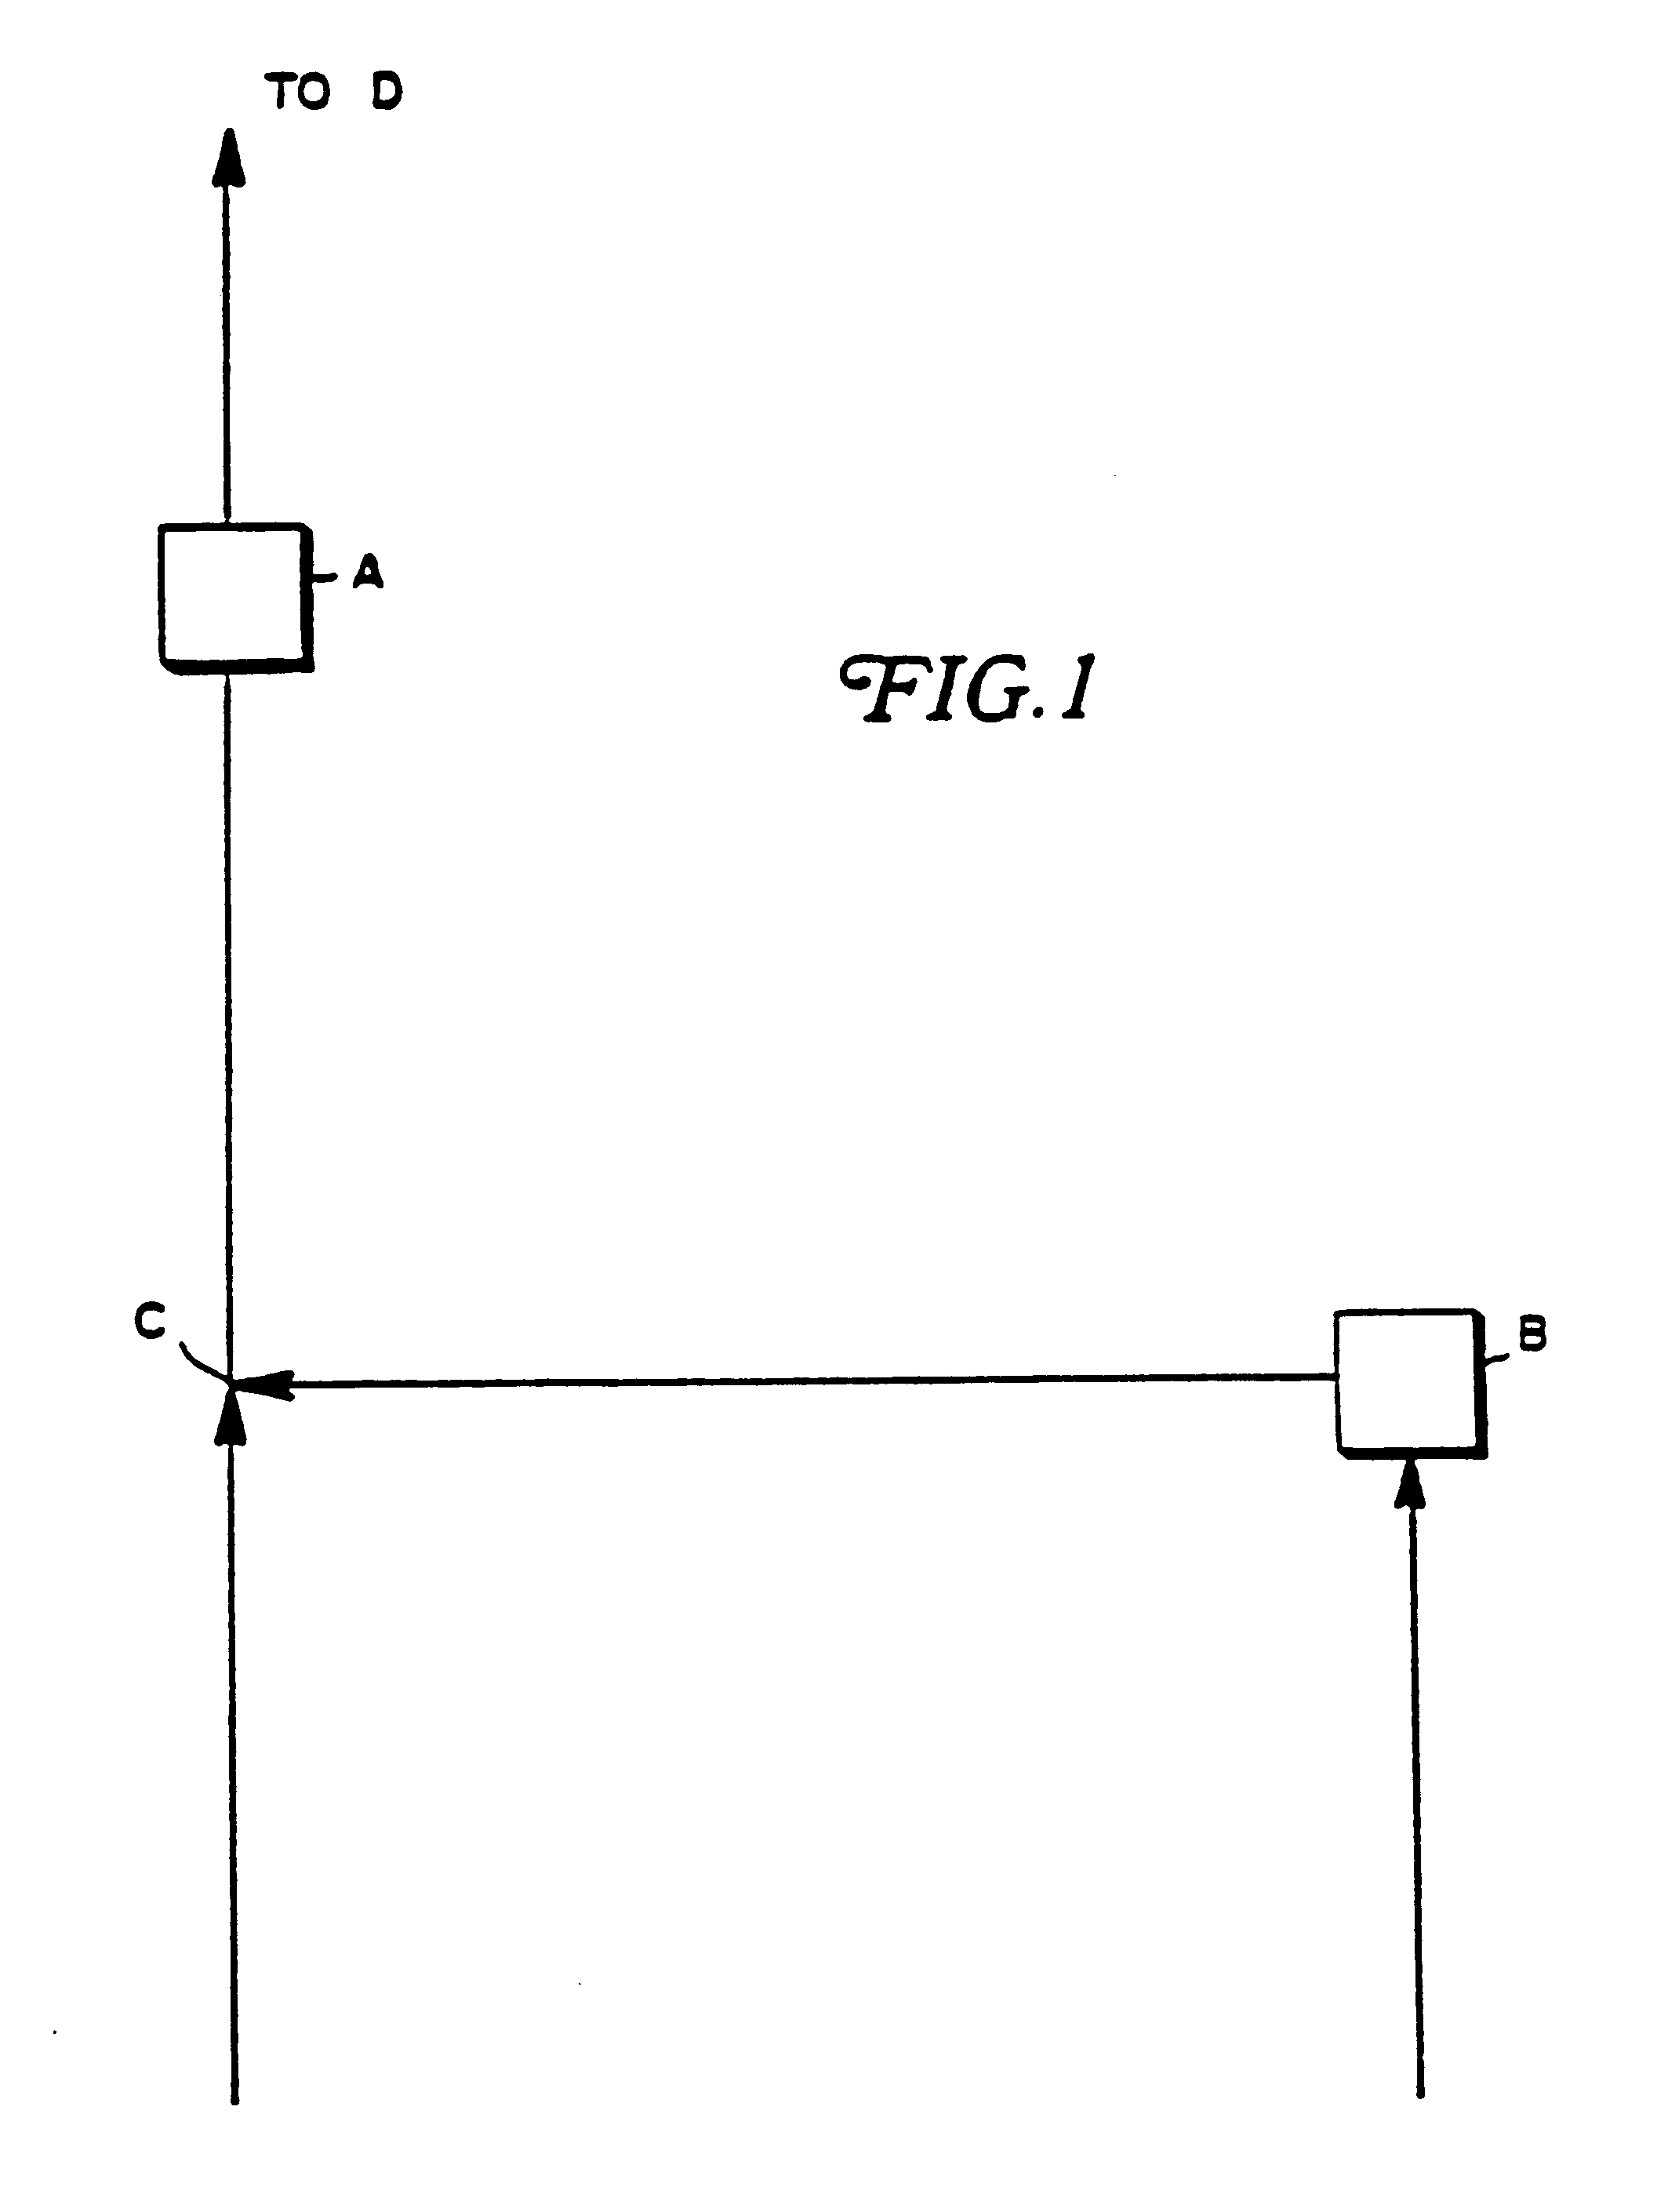 Process for removal of dissolved hydrogen sulfide and reduction of sewage BOD in sewer or other waste systems